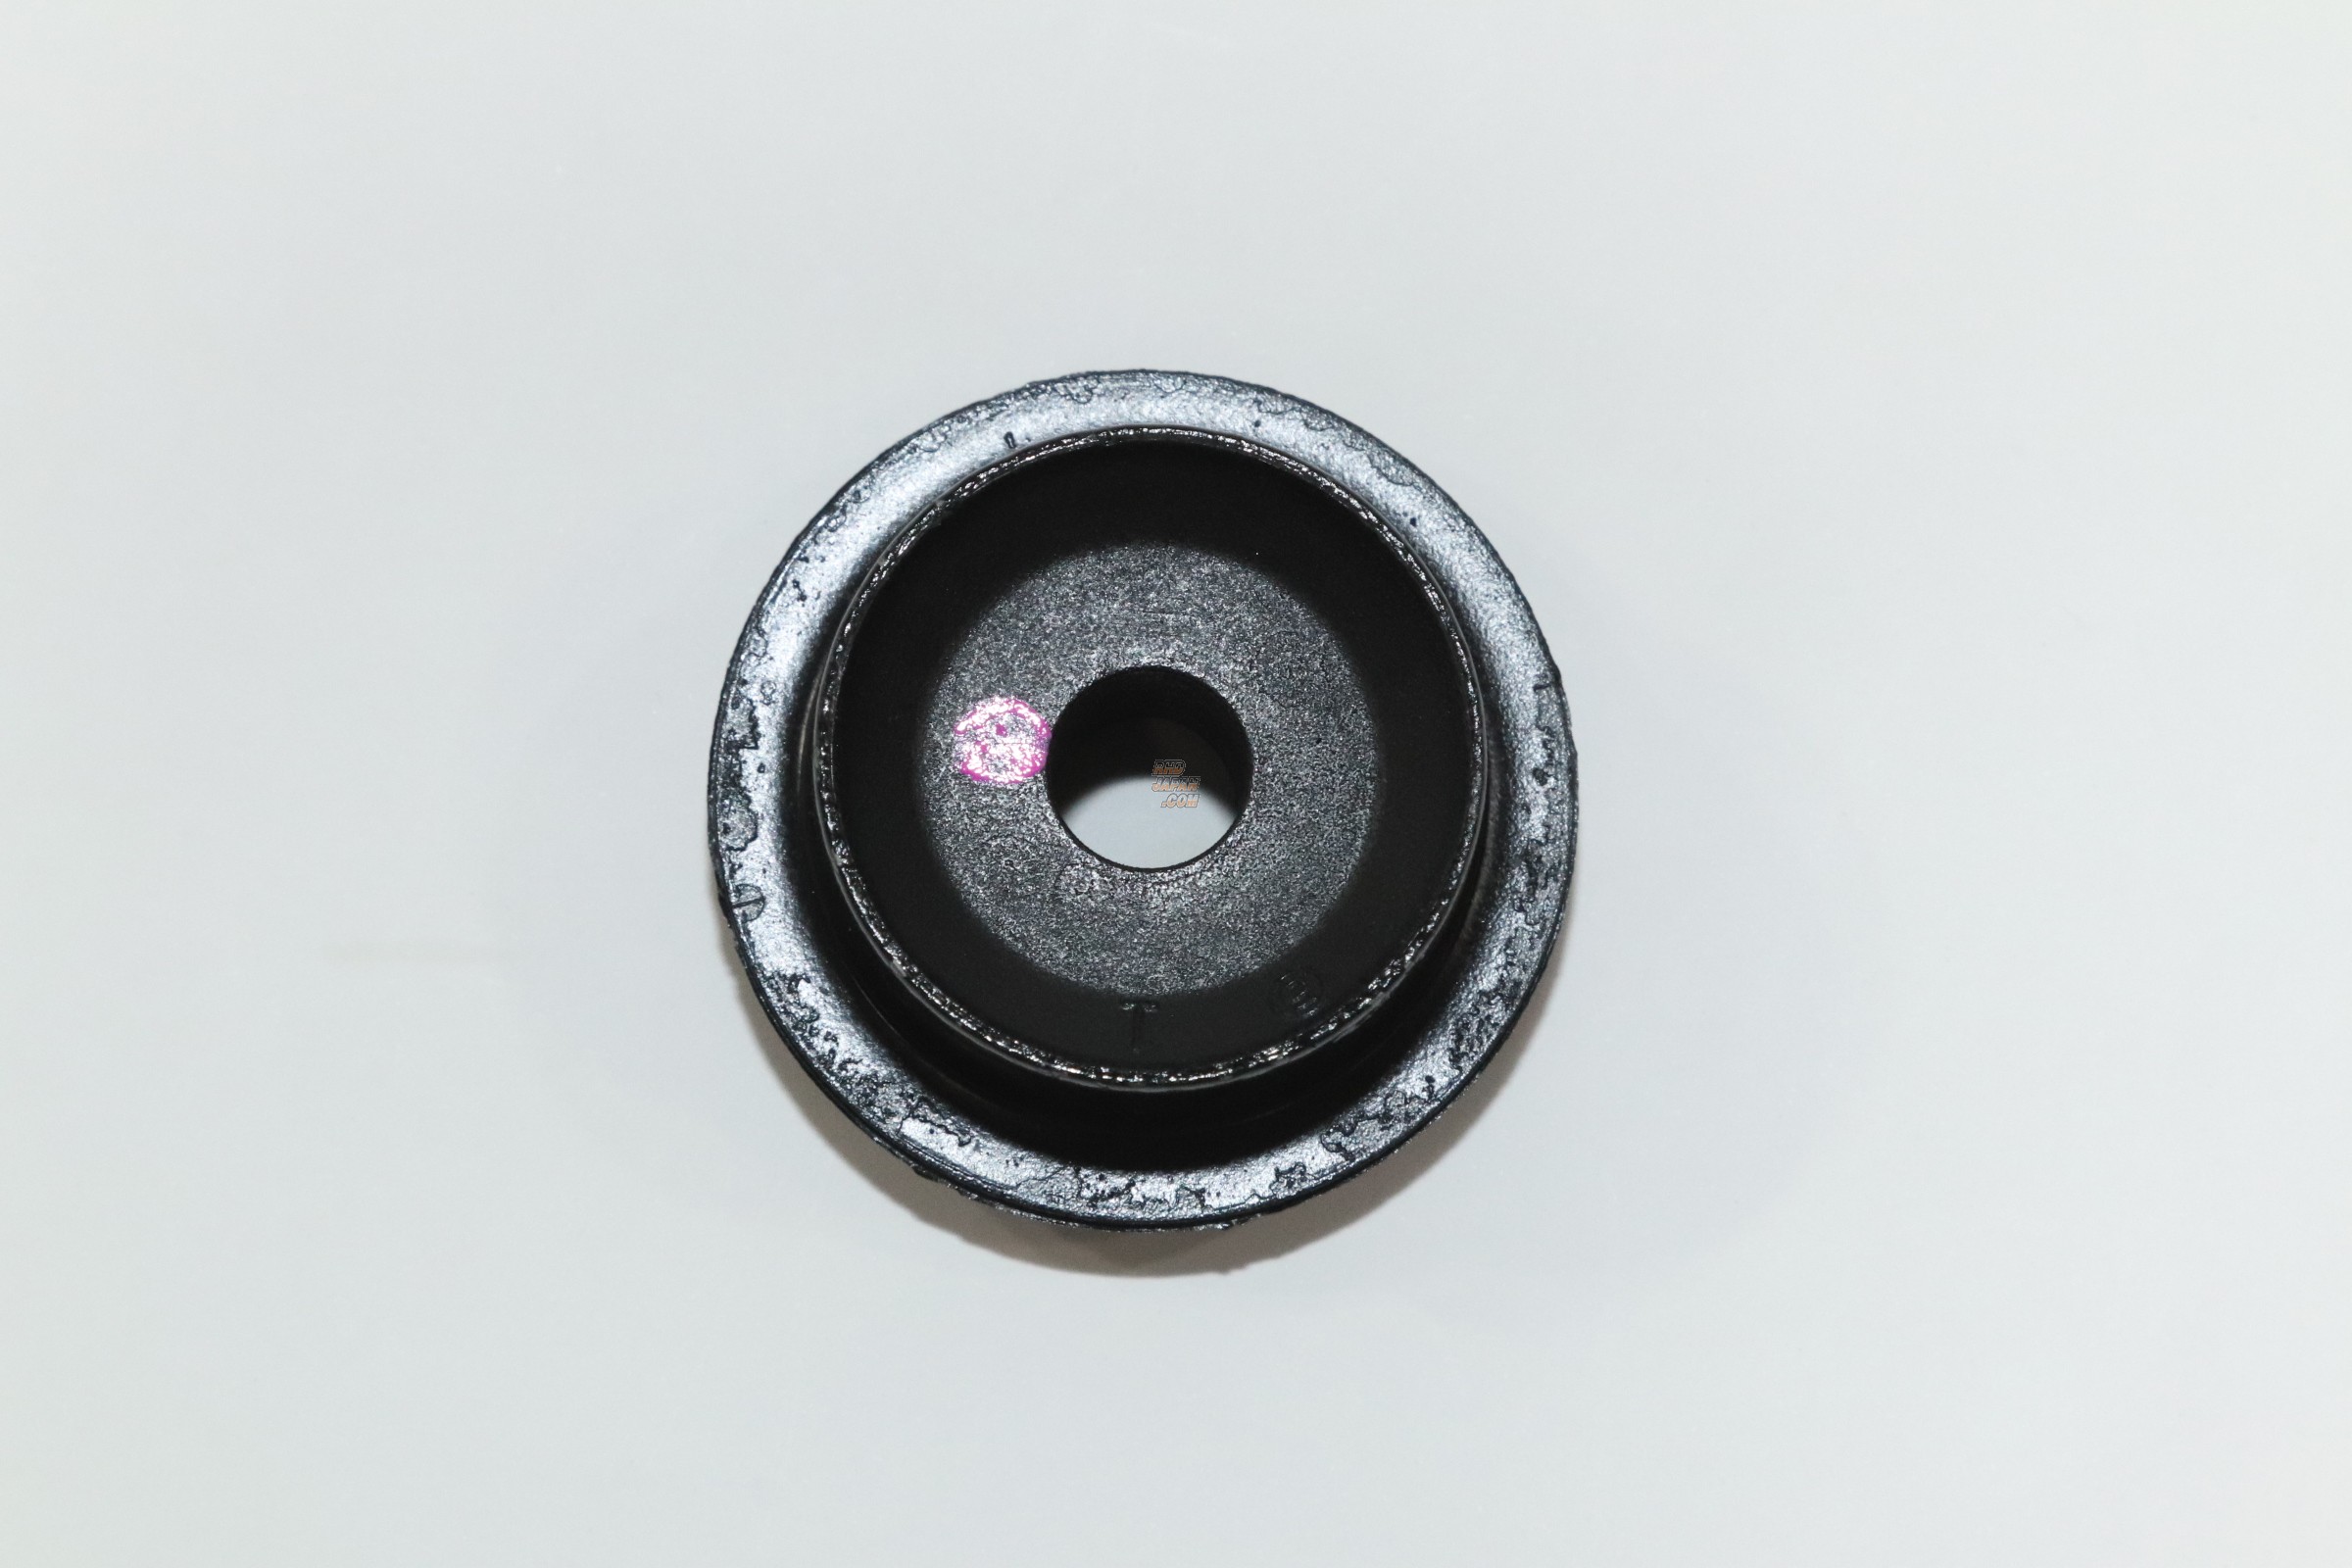 RALLIART Lower Radiator Support Bushing - CT9A